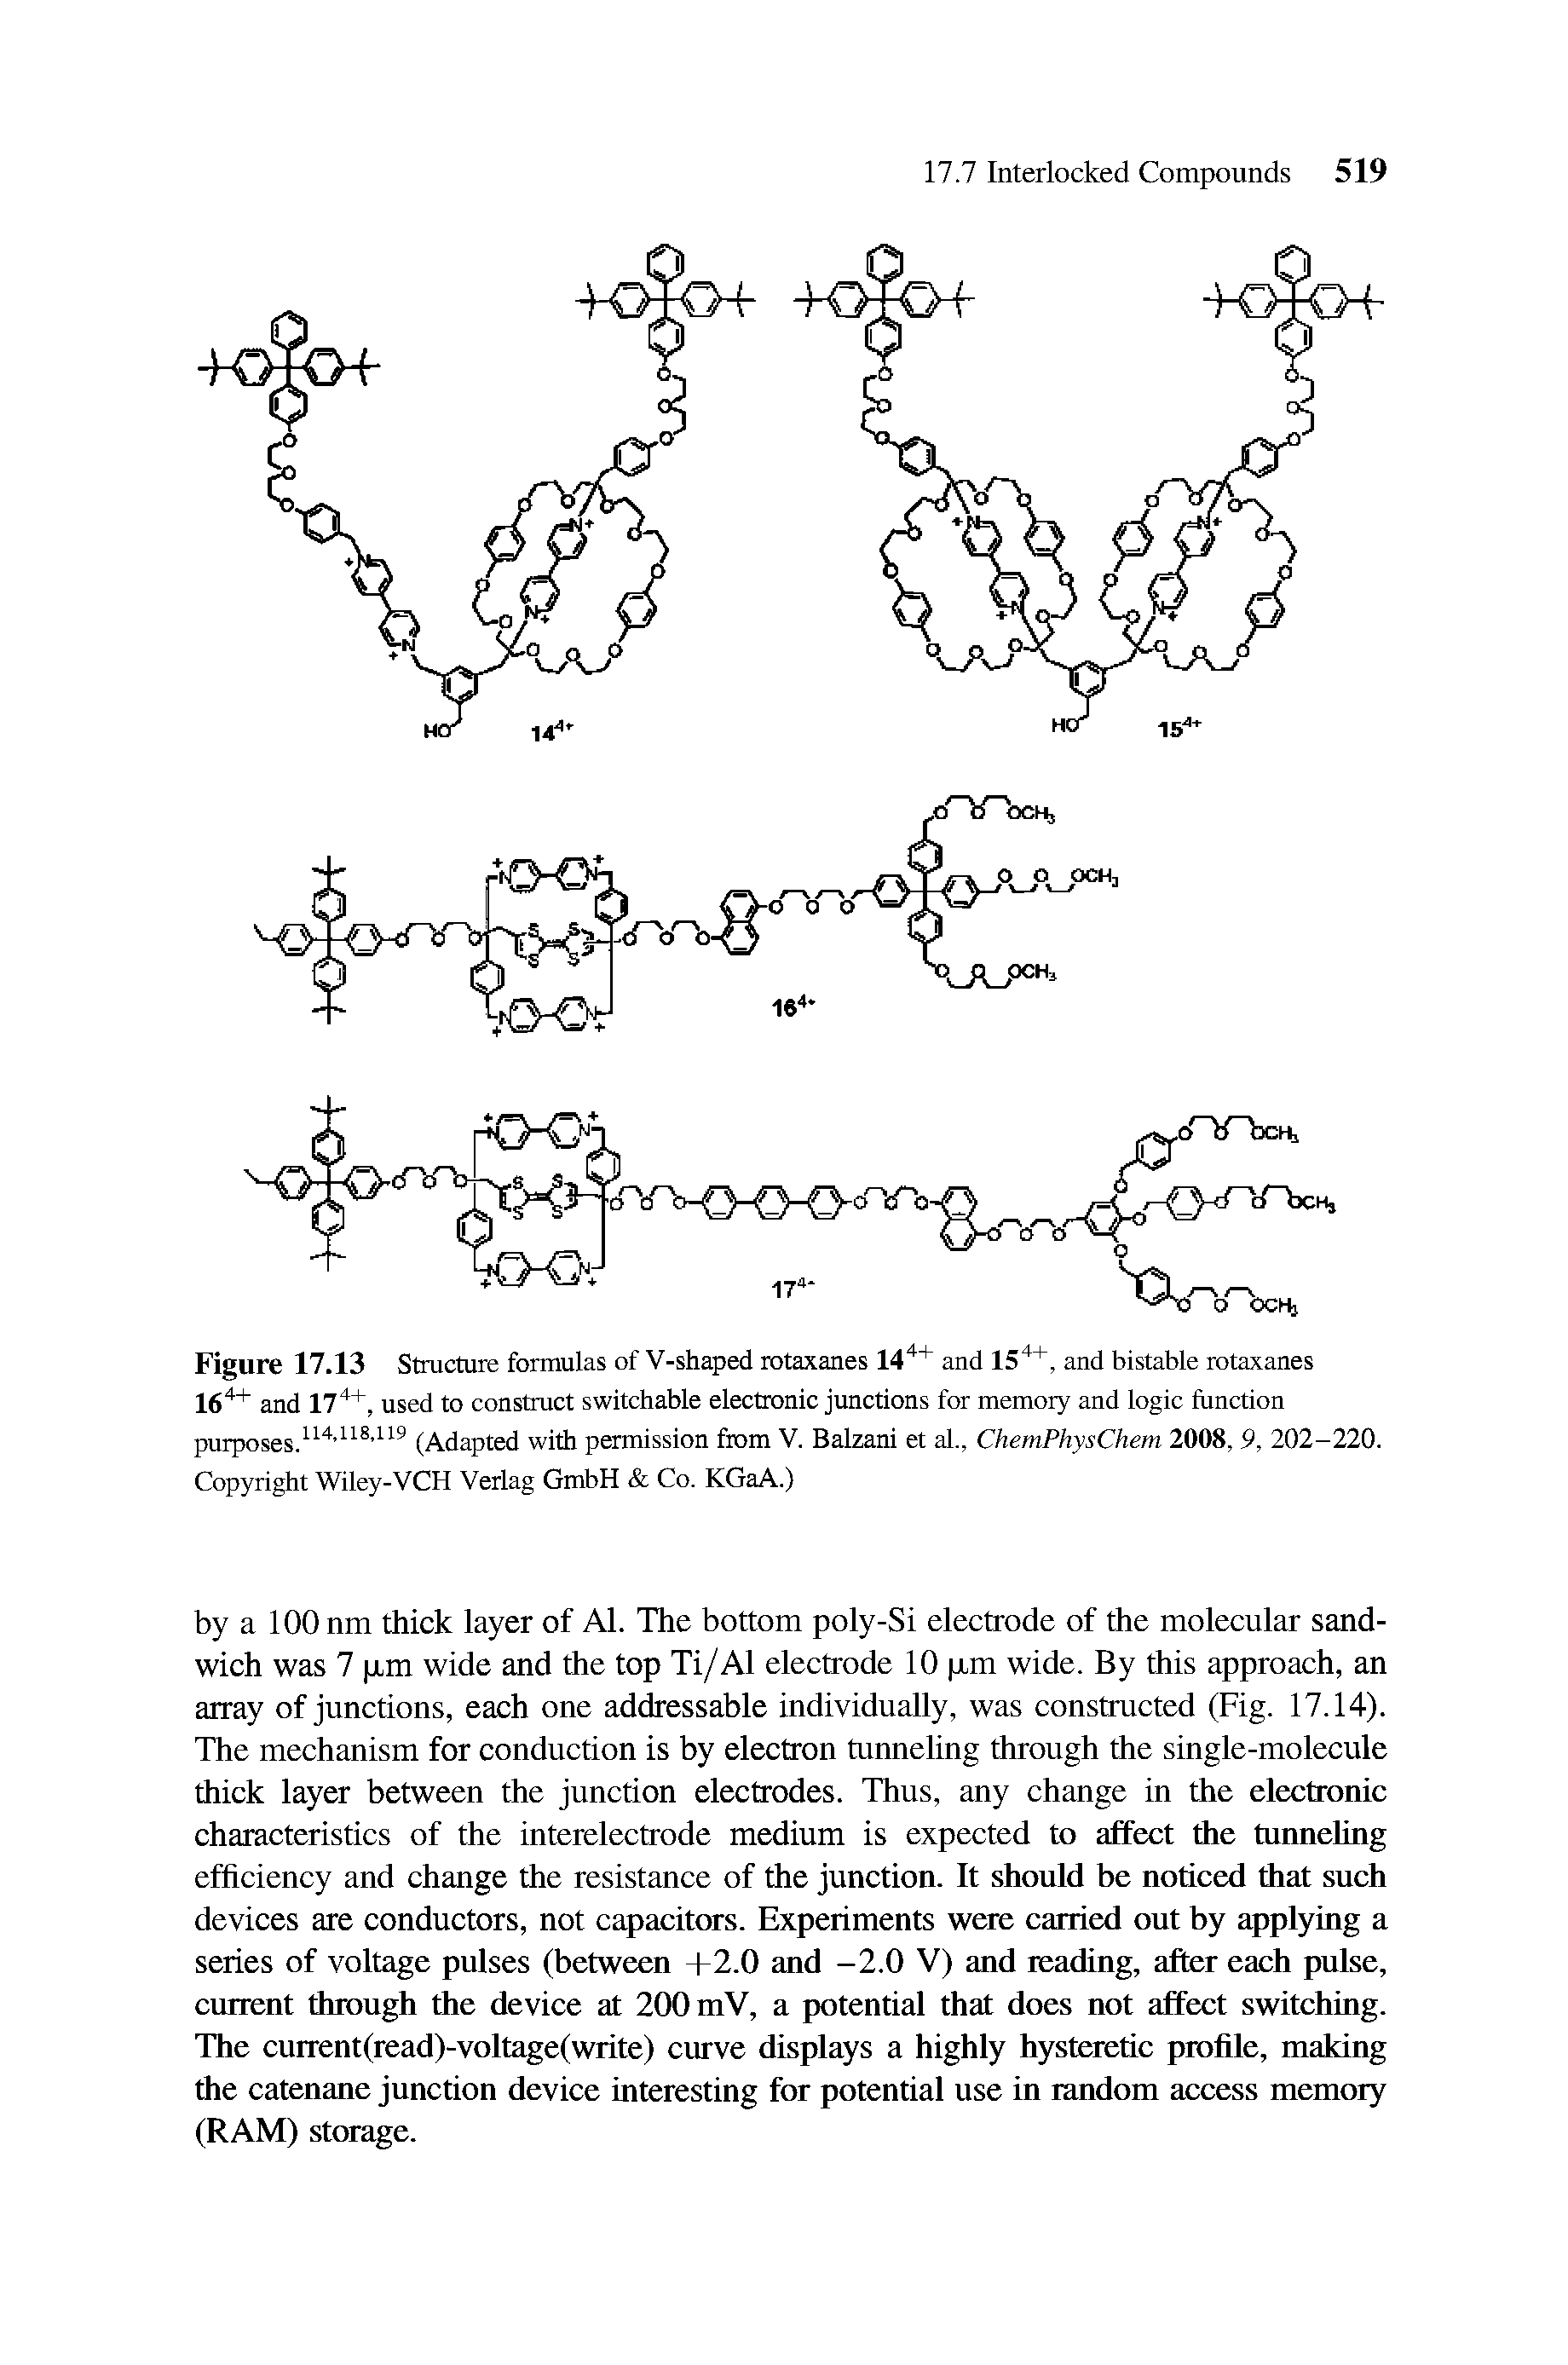 Figure 17.13 Structure formulas of V-shaped rotaxanes 144+ and 154+, and bistable rotaxanes 164+ and 174+, used to construct switchable electronic junctions for memory and logic function purposes.114 118 119 (Adapted with permission from V. Balzani et al., ChemPhysChem 2008, 9, 202-220. Copyright Wiley-VCH Verlag GmbH Co. KGaA.)...